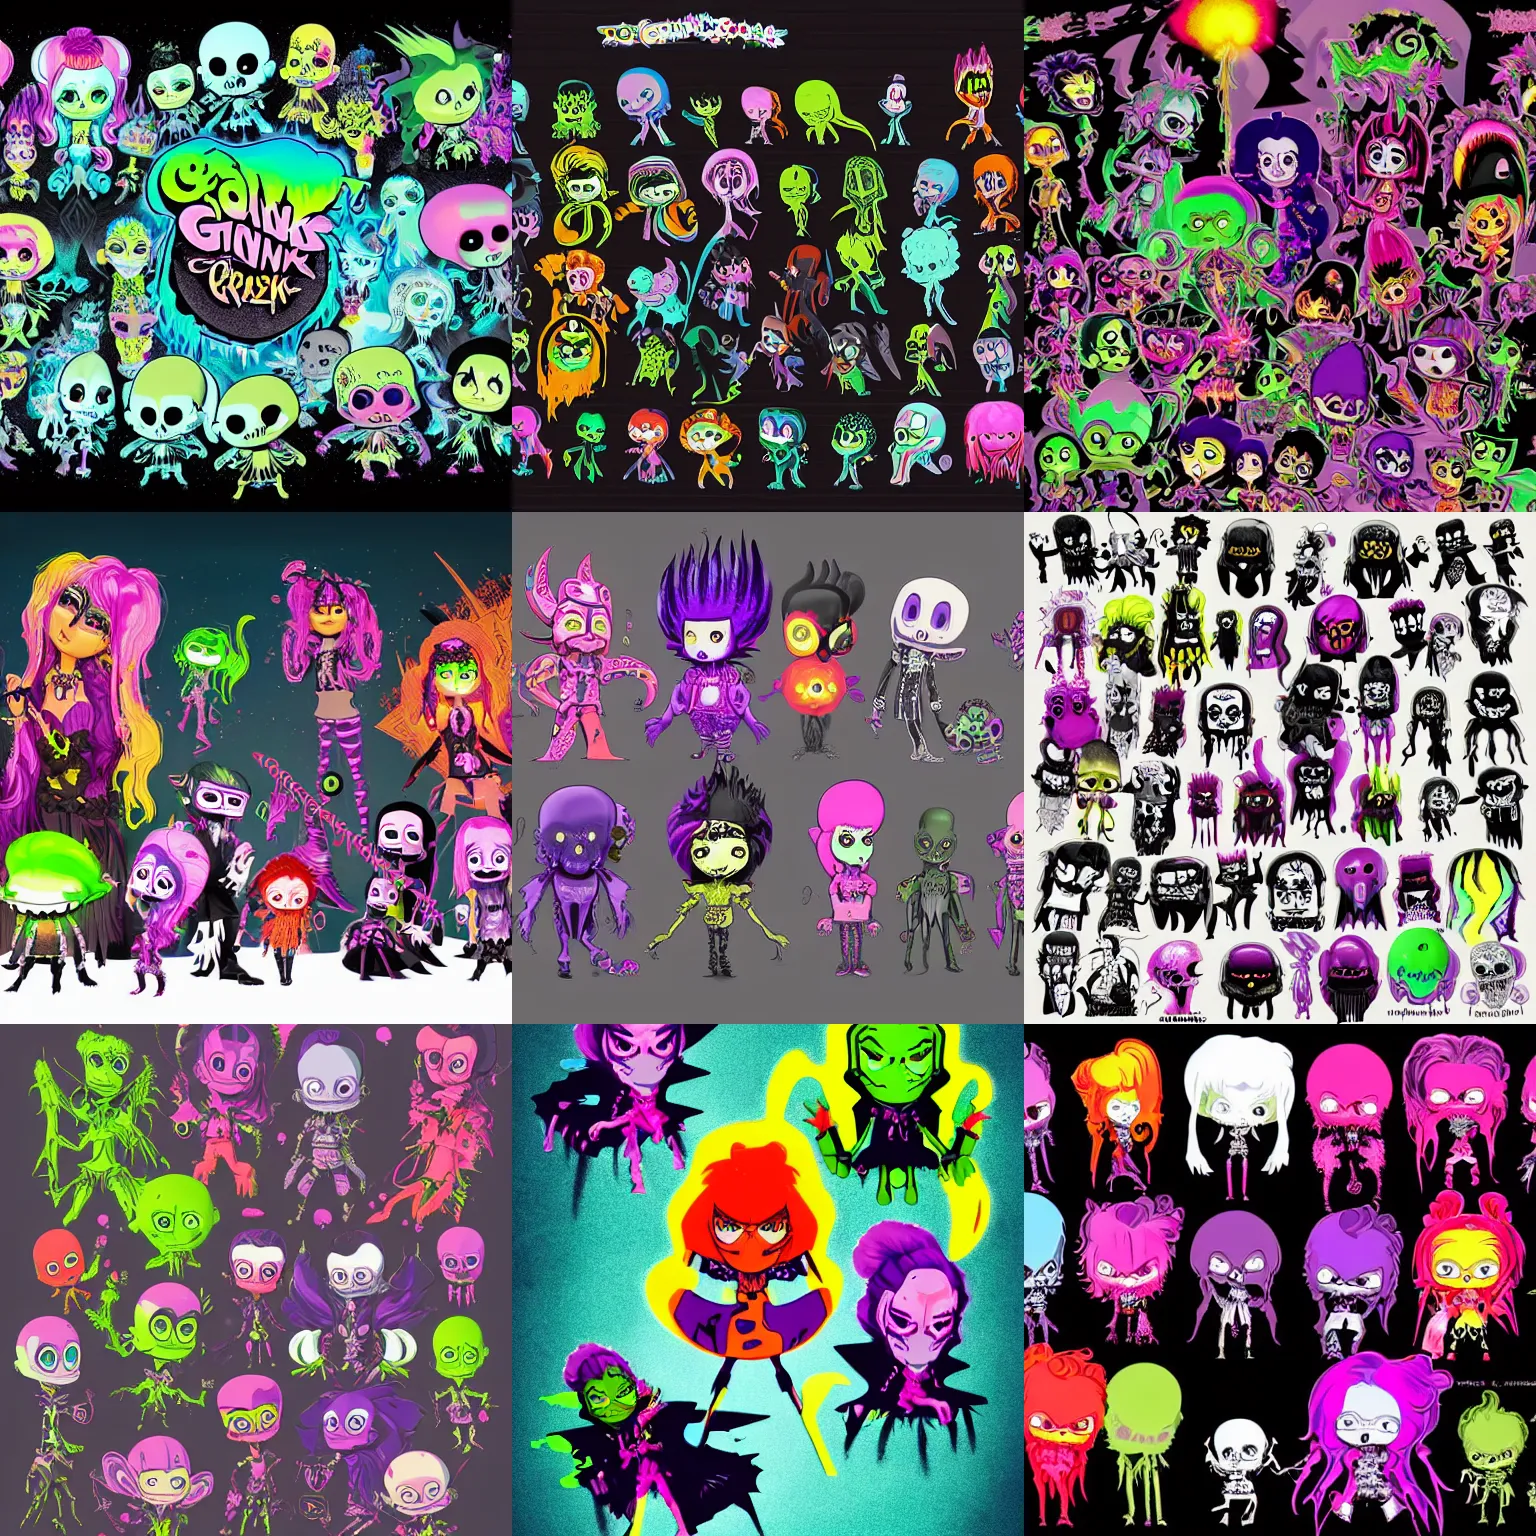 Prompt: CGI lisa frank gothic punk toxic glow in the dark bones vampiric rockstar vampire squid concept character designs of various shapes and sizes by genndy tartakovsky and the creators of fret nice at pieces interactive and splatoon by nintendo and the psychonauts by doublefines tim shafer artists for the new hotel transylvania film managed by pixar and overseen by Jamie Hewlett from gorillaz